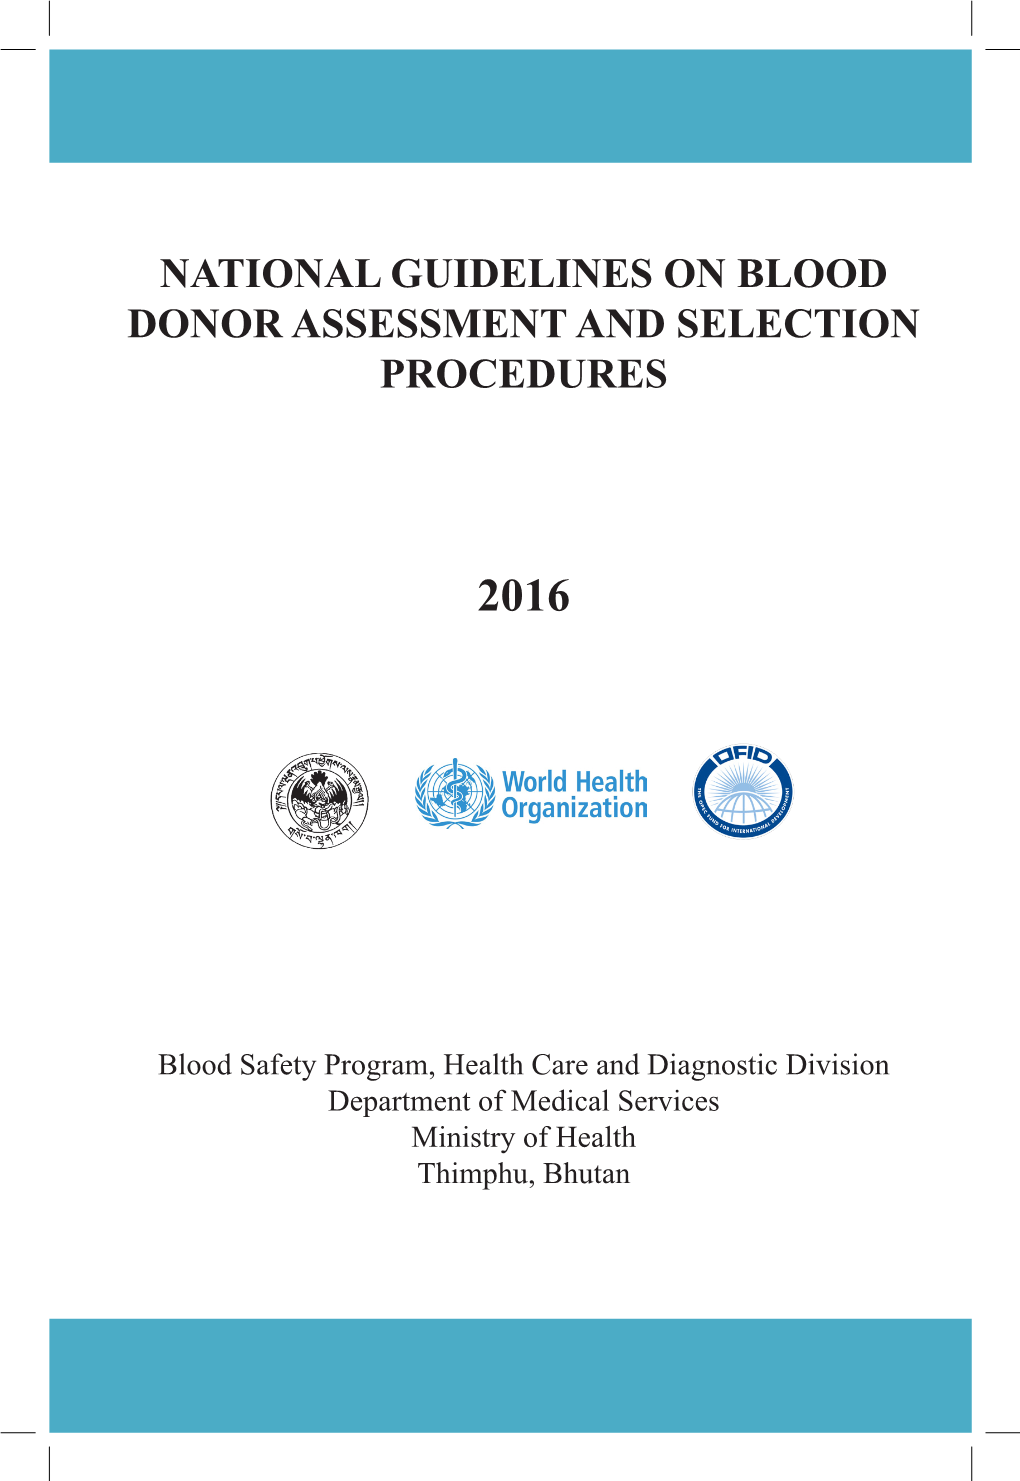 National Guidelines on Blood Donor Assessment and Selection Procedures